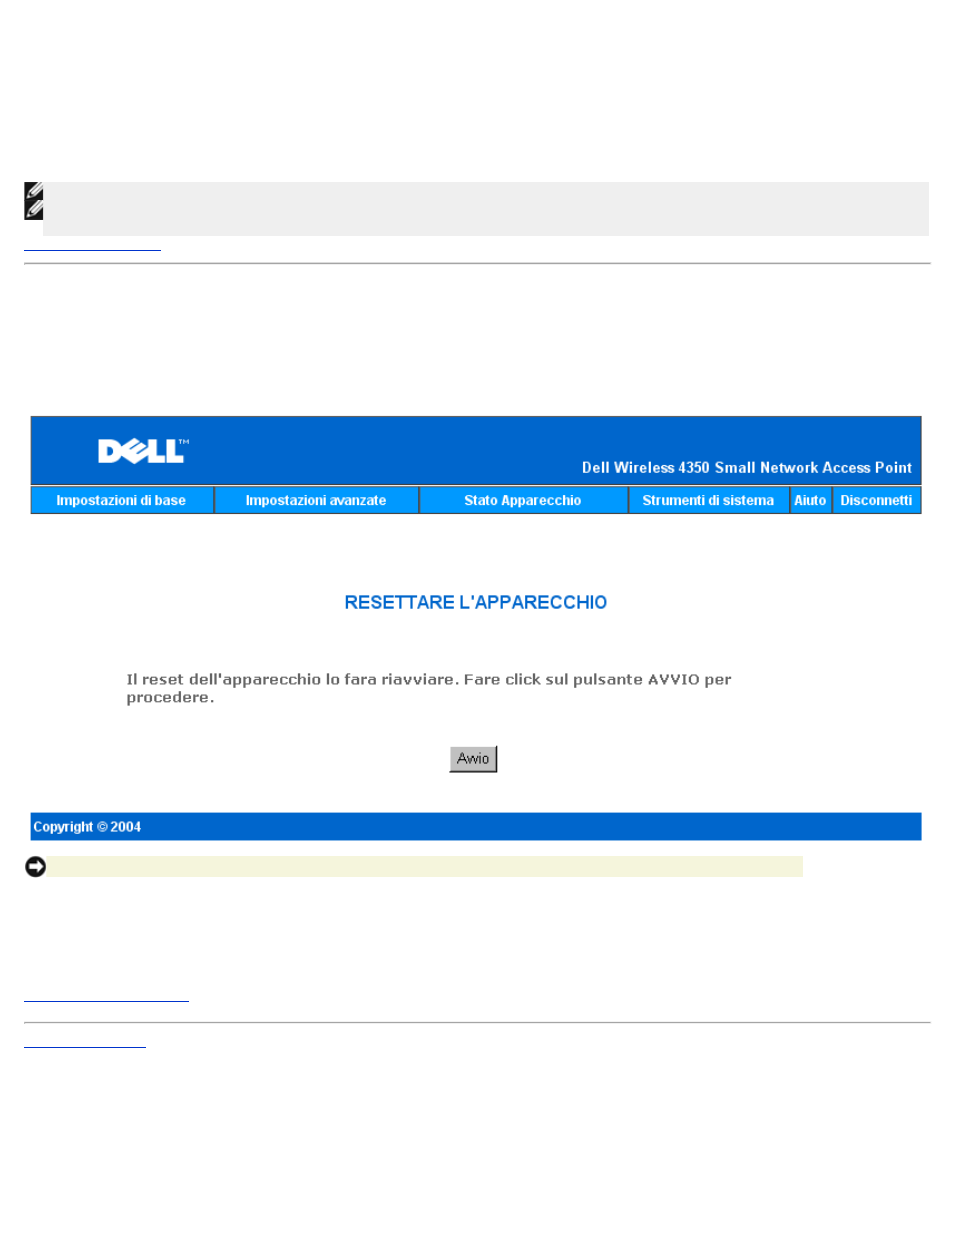 Reset device (reset del dispositivo) | Dell 4350 Network Access Point Manuale d'uso | Pagina 224 / 240